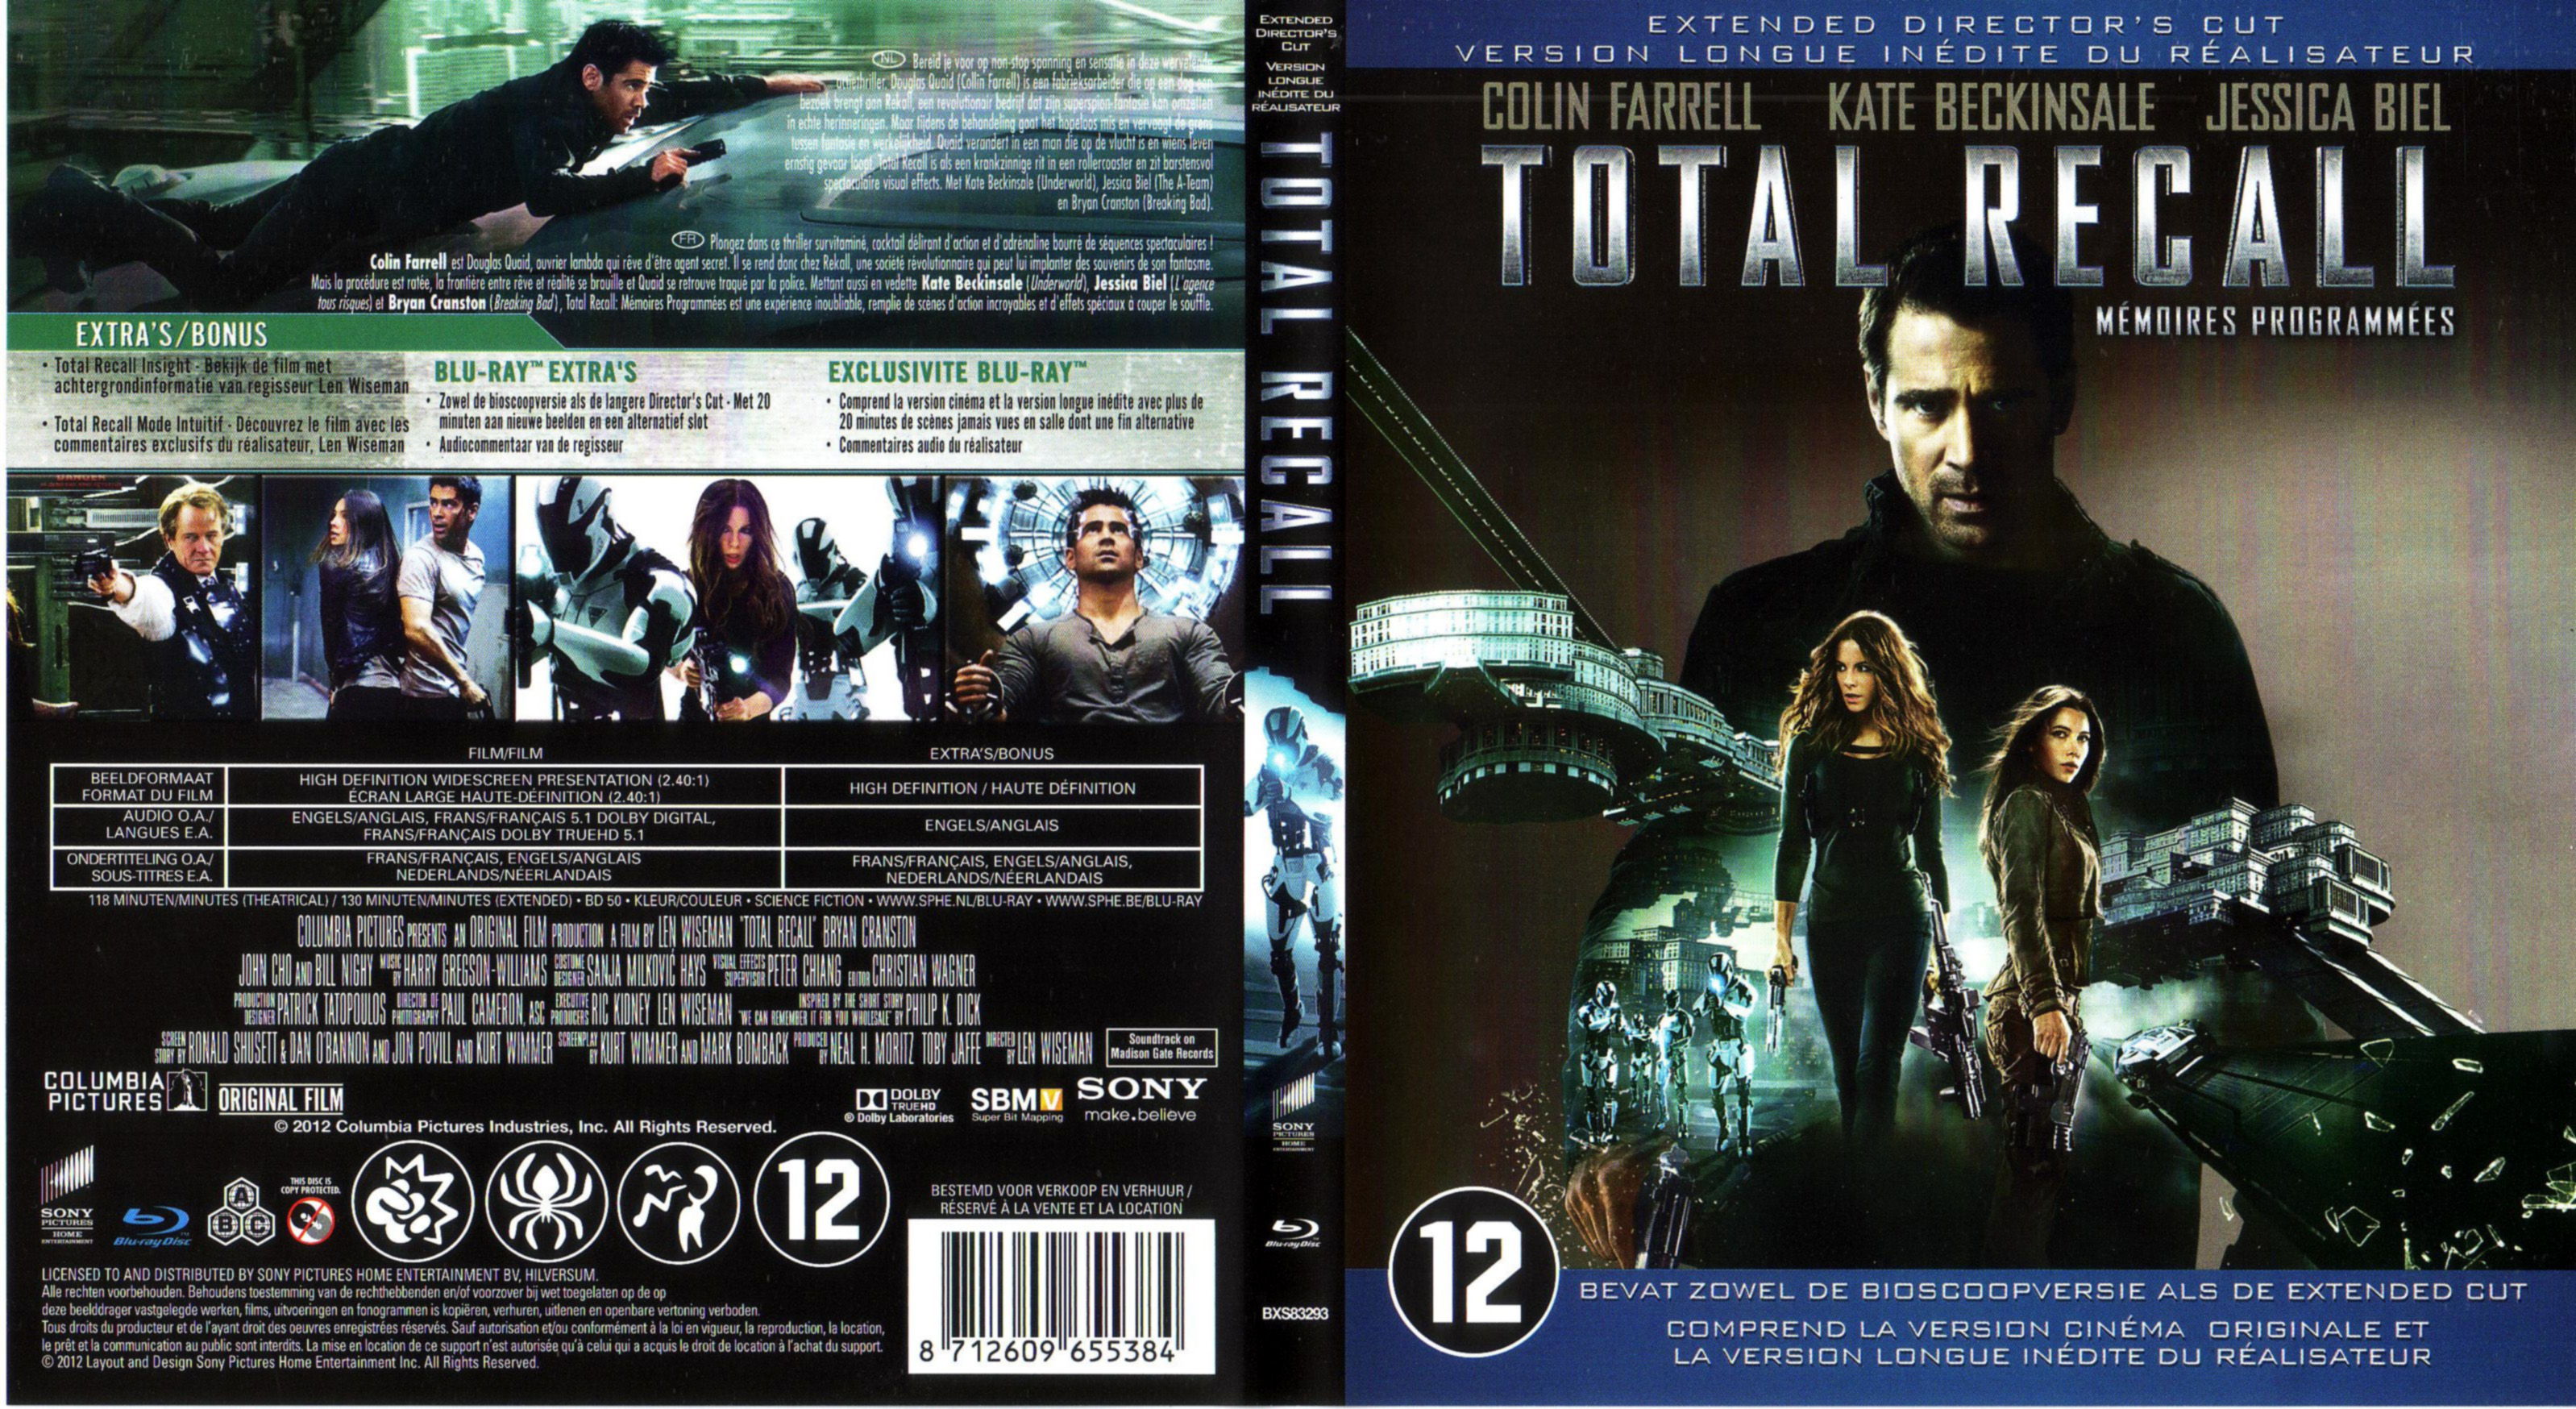 Jaquette DVD Total Recall Mmoires Programmes (BLU-RAY) v2